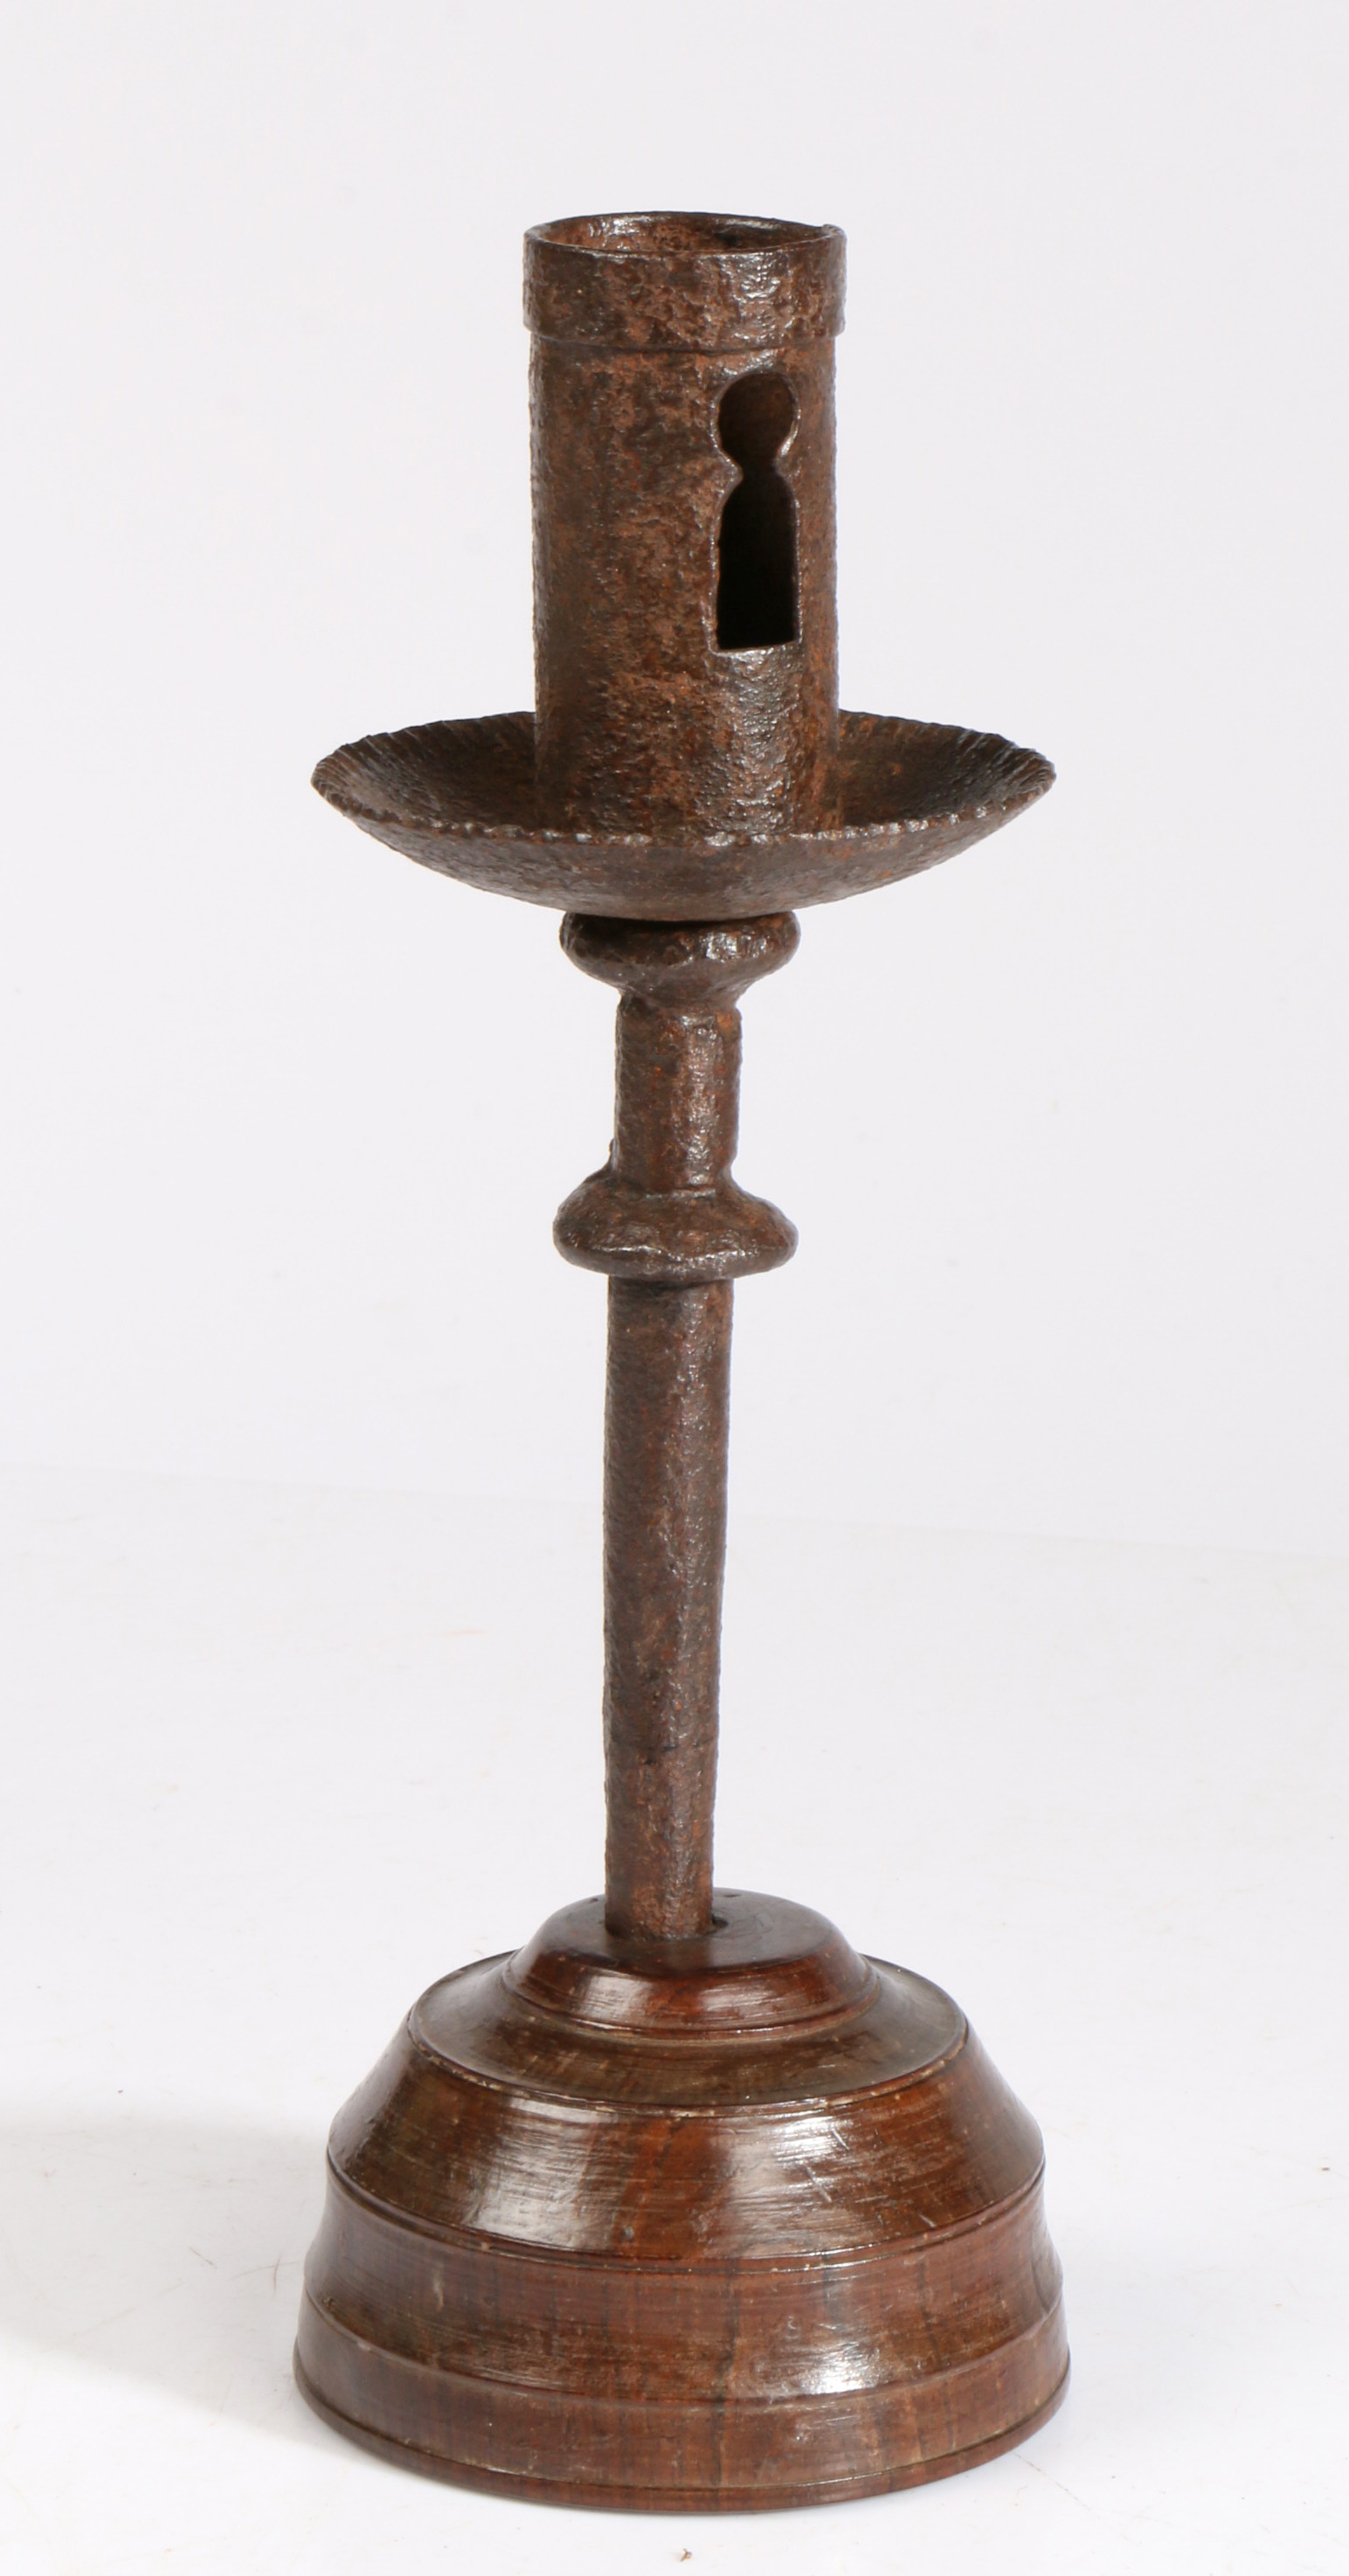 A 16th century iron socket candlestick, on an early 19th century turned lignum vitae base  The